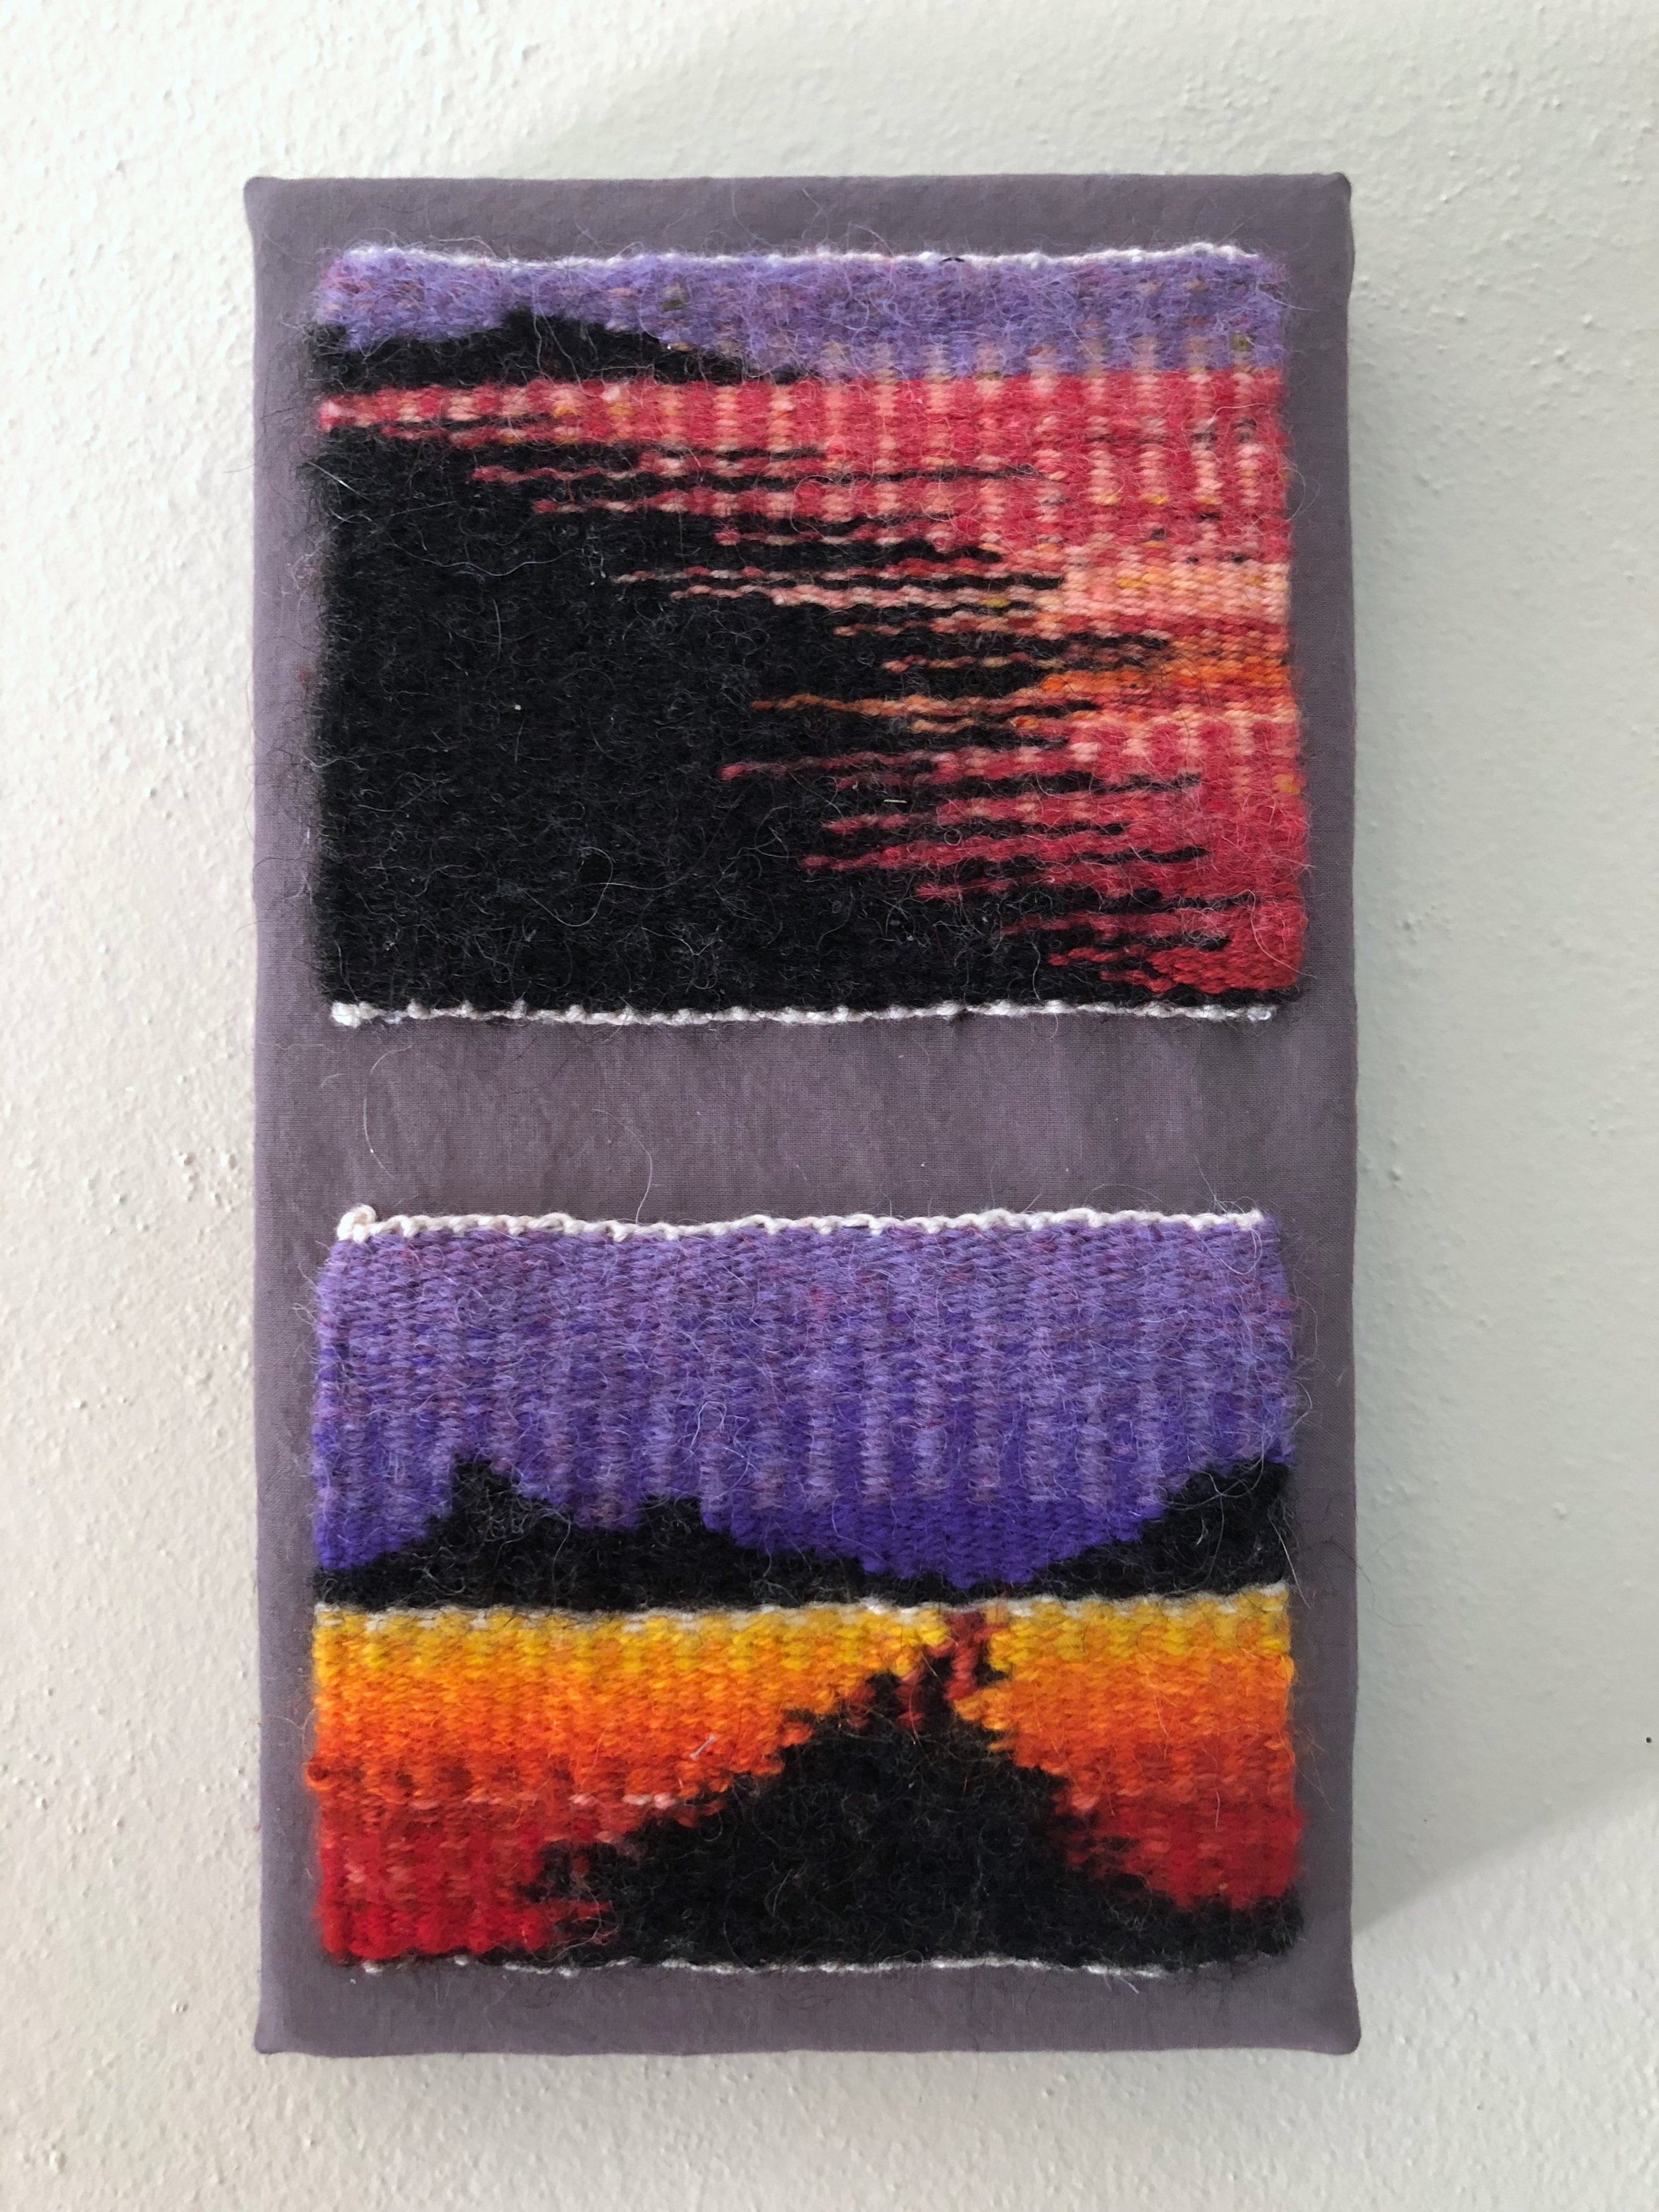   Desert Hearts I &amp; II , 2018. Linen, wool, and cotton. 7” x 15”. Featured in  Warp and Weft: An Exhibit of Tapestry  at Webster Arts in 2018. 